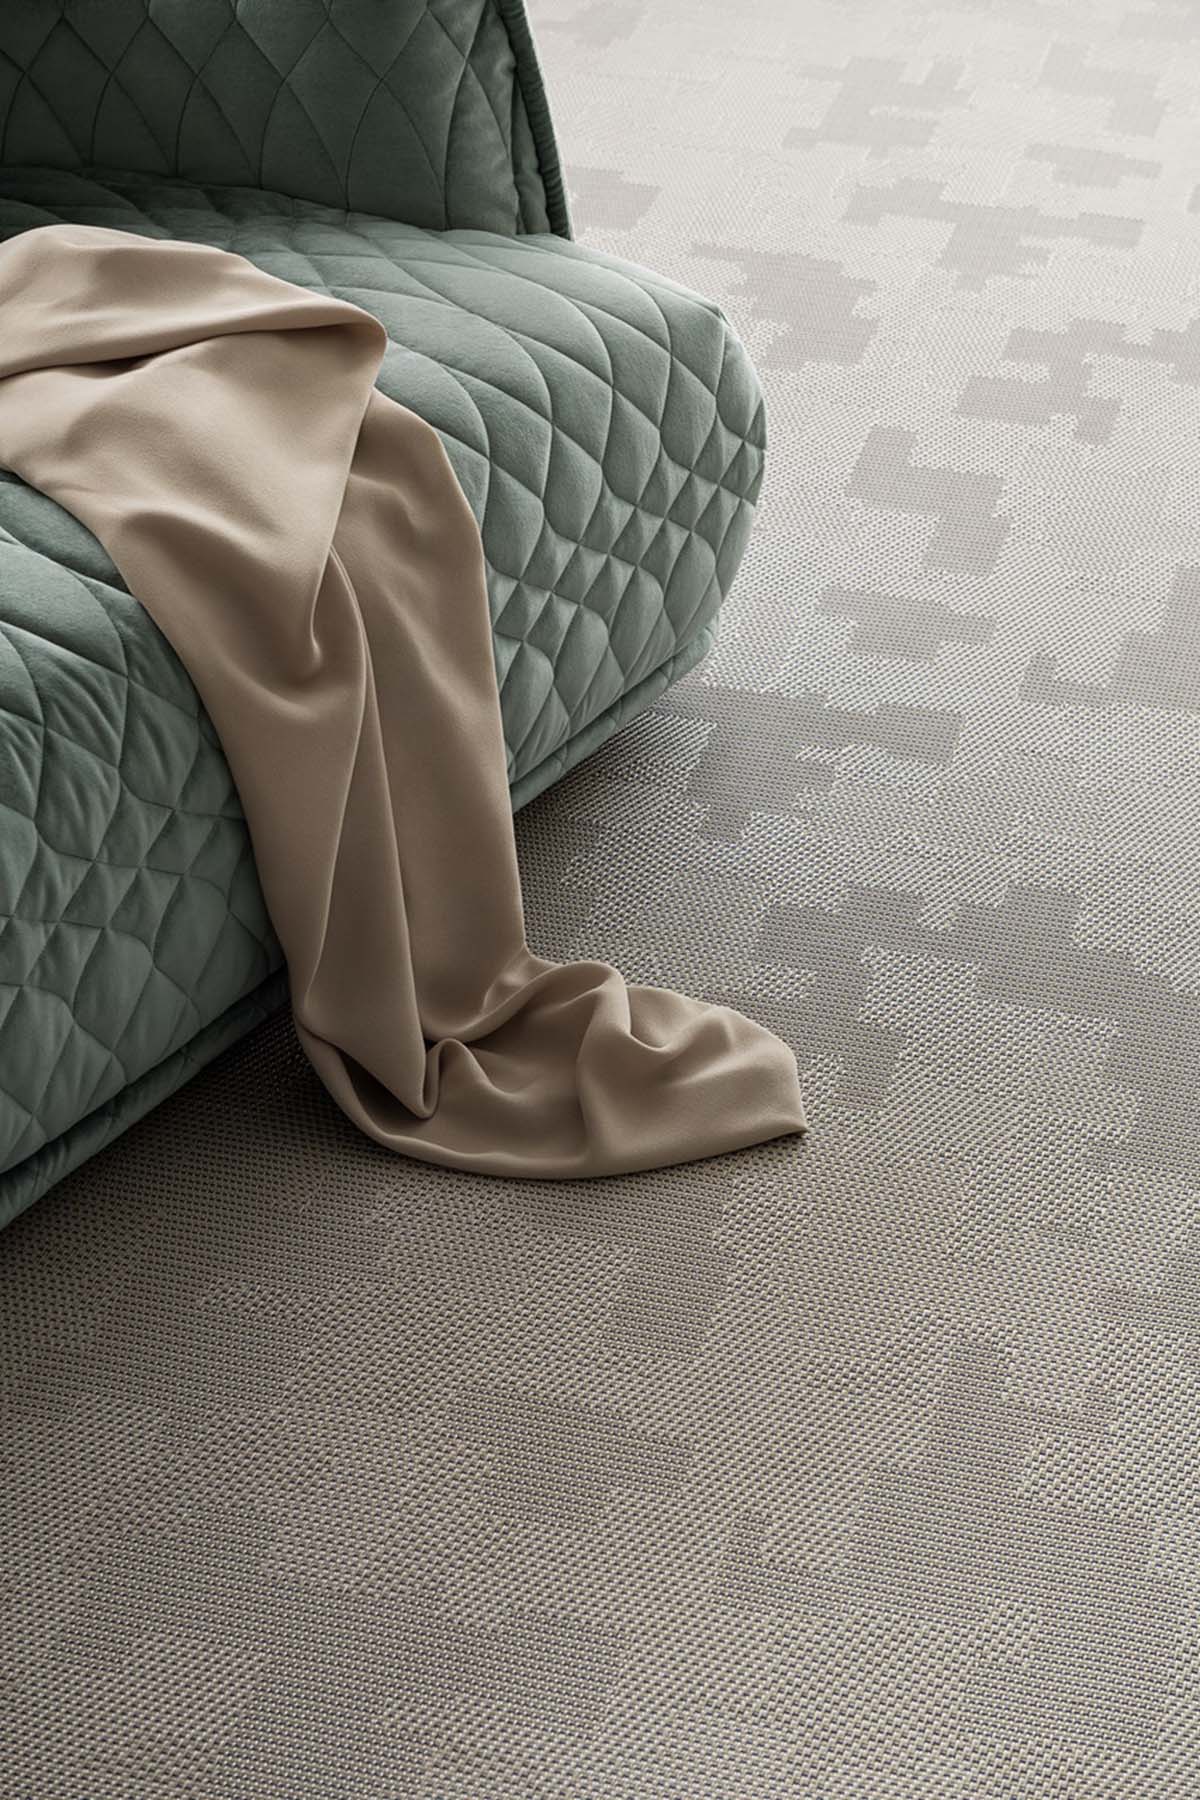 patterns floor covering, Floor Covering Collection Resembles Japanese Sashiko Stitching